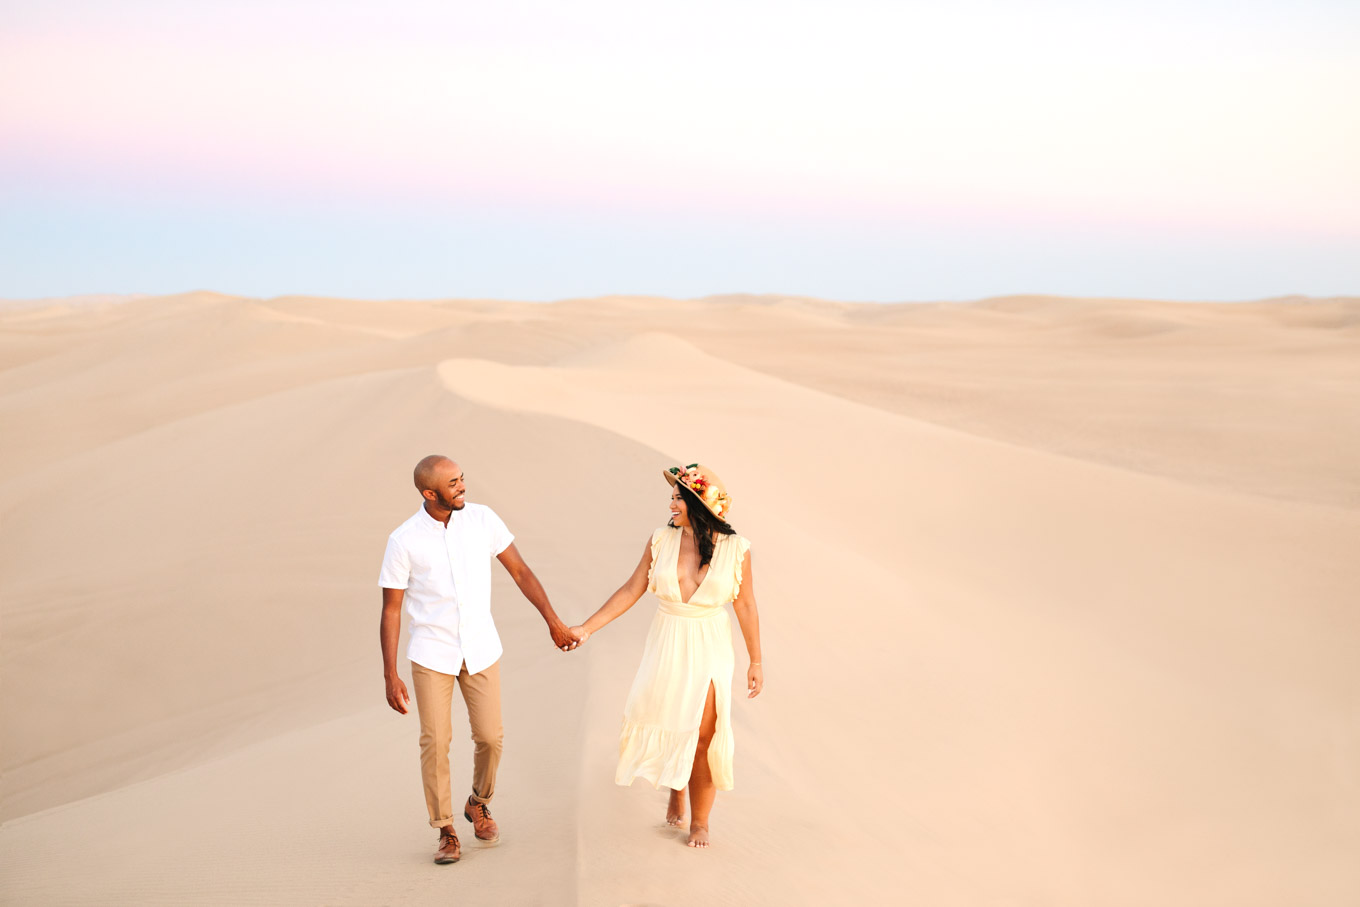 Engaged couple walking hand in hand on sand dune | California Sand Dunes engagement session | Colorful Palm Springs wedding photography | #palmspringsphotographer #sanddunes #engagementsession #southerncalifornia  Source: Mary Costa Photography | Los Angeles